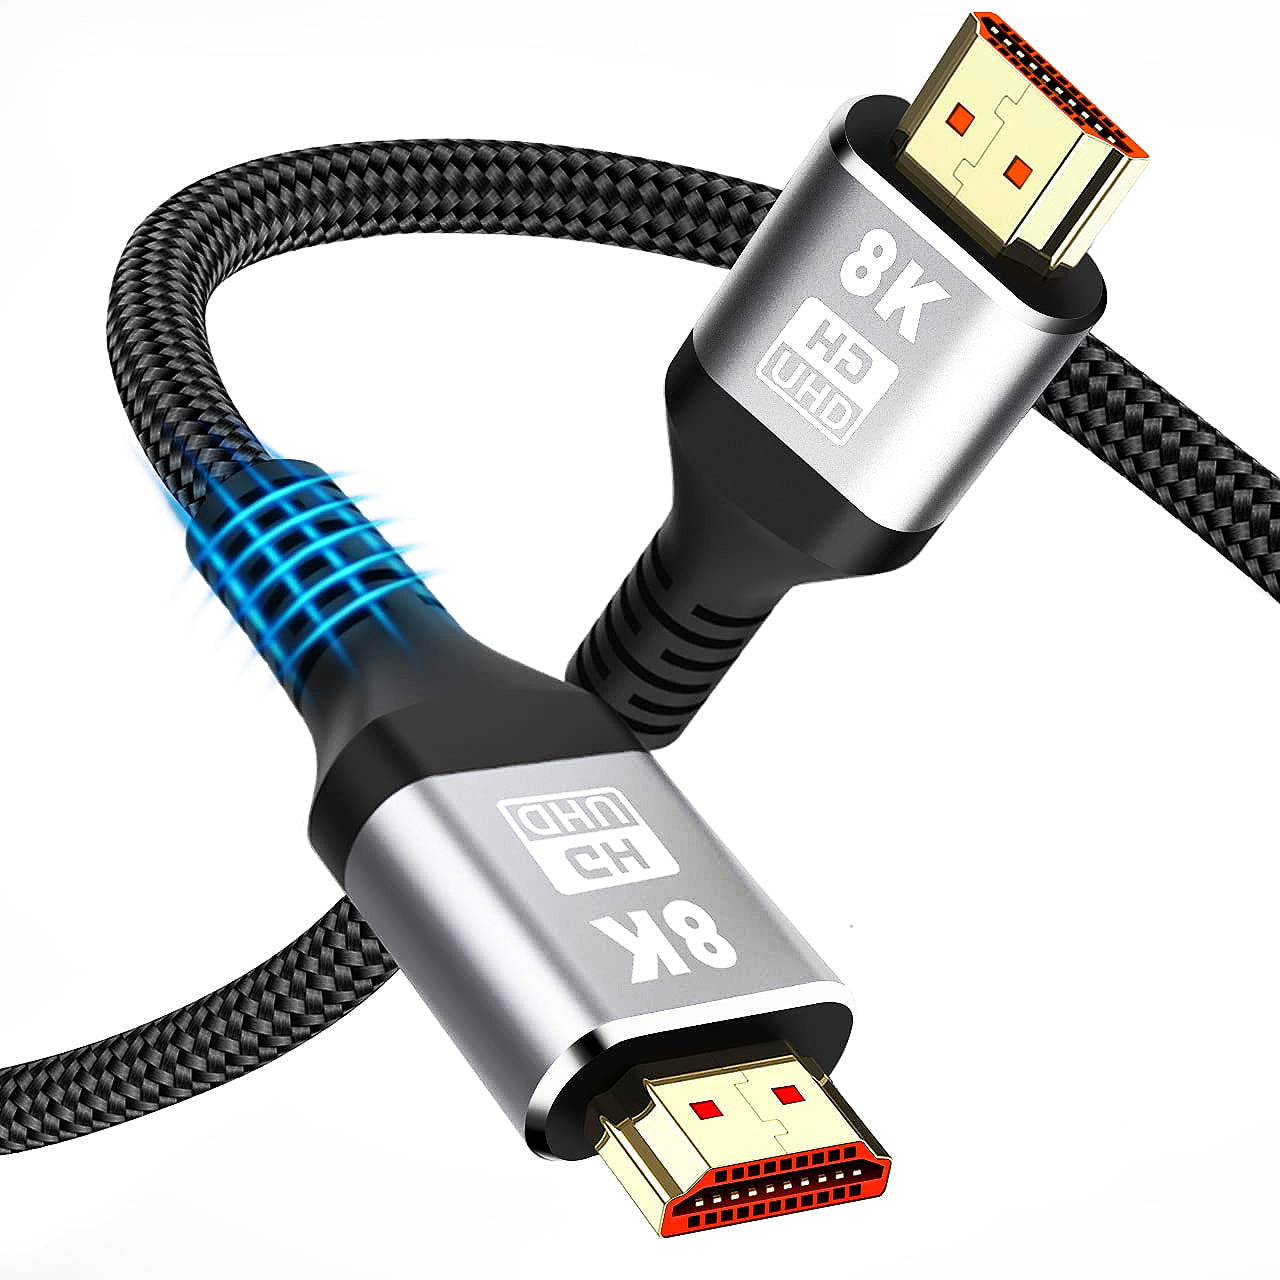 Verilux 8K HDMI 2.1 Cable 1.5m,48Gbps Ultra HD Lead High-Speed Cord, Supports 8K@60HZ, 4K@120Hz, eARC HDR10, HDCP 2.2/2.3 Dolby, 3D, VRR, Compatible with Fire TV/Roku TV/PS5/Xbox/Nintendo Switch